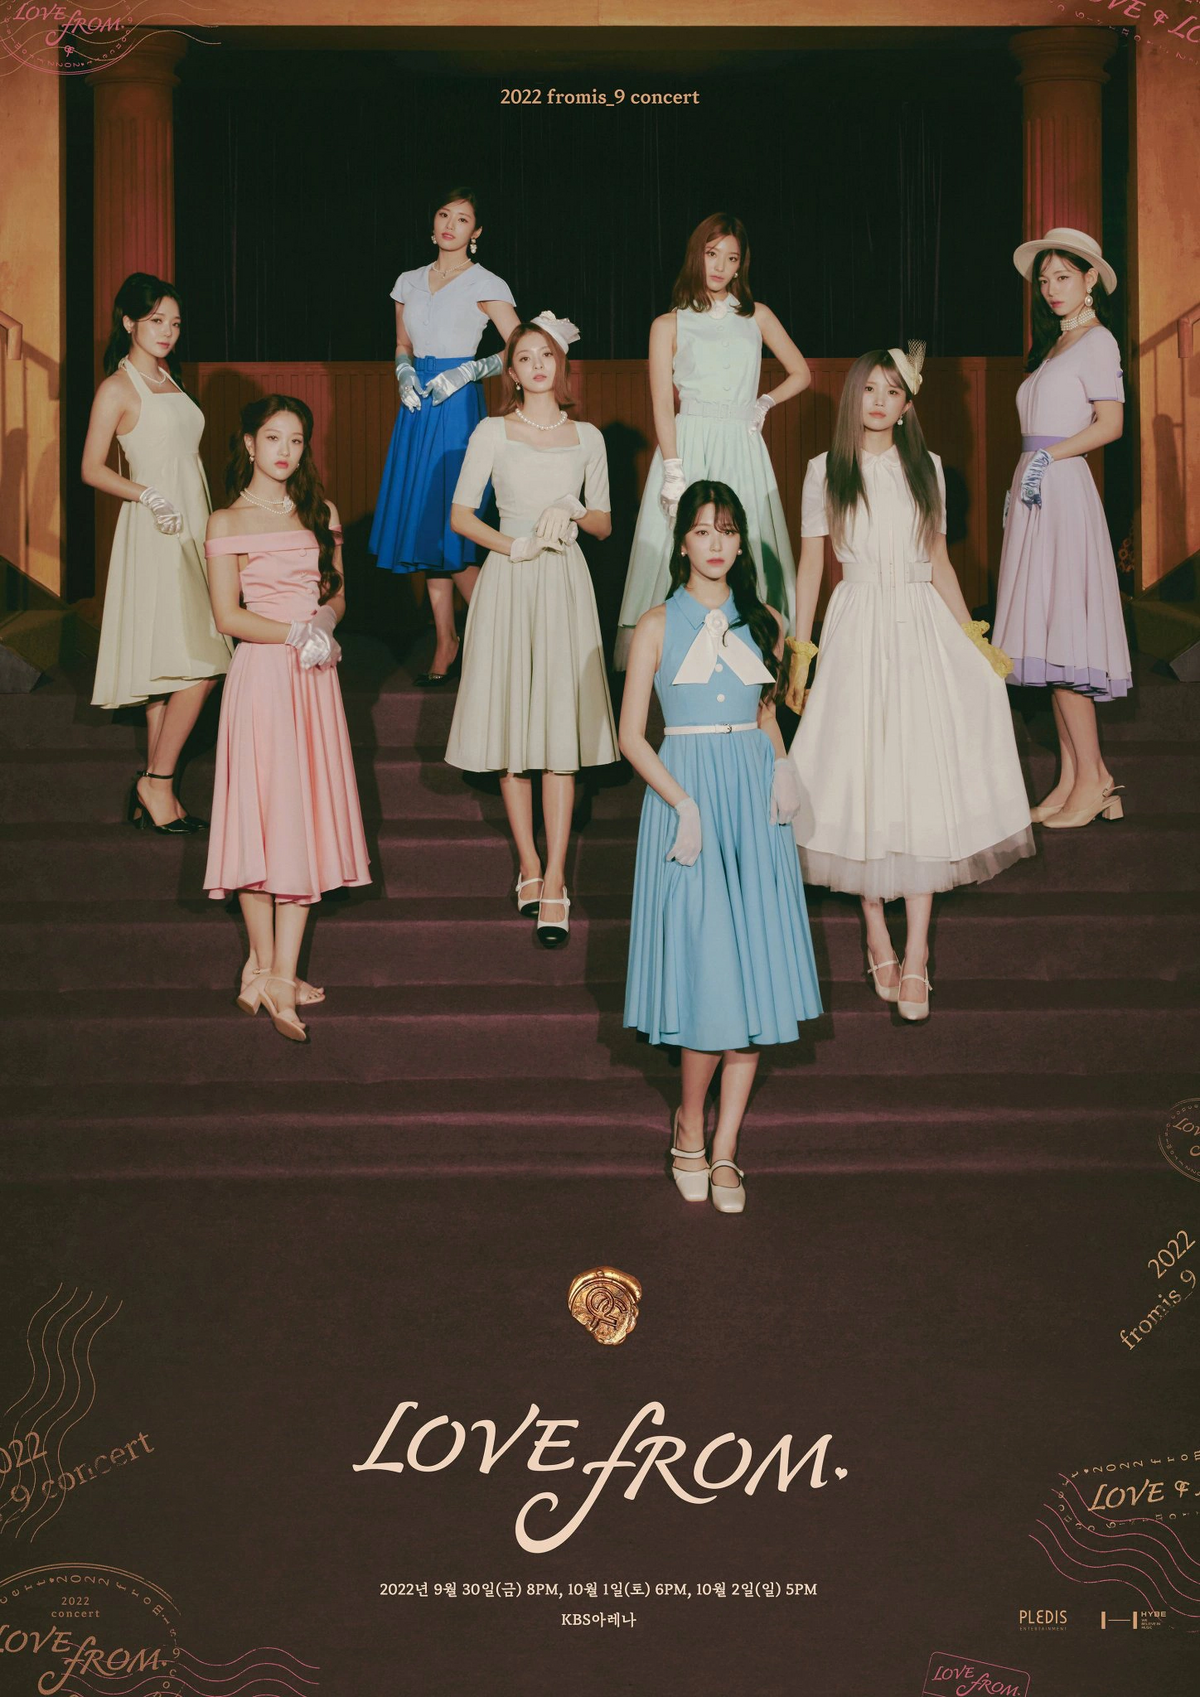 2022 fromis 9 concert 'LOVE FROM.' | Fromis_9 Wiki | Fandom